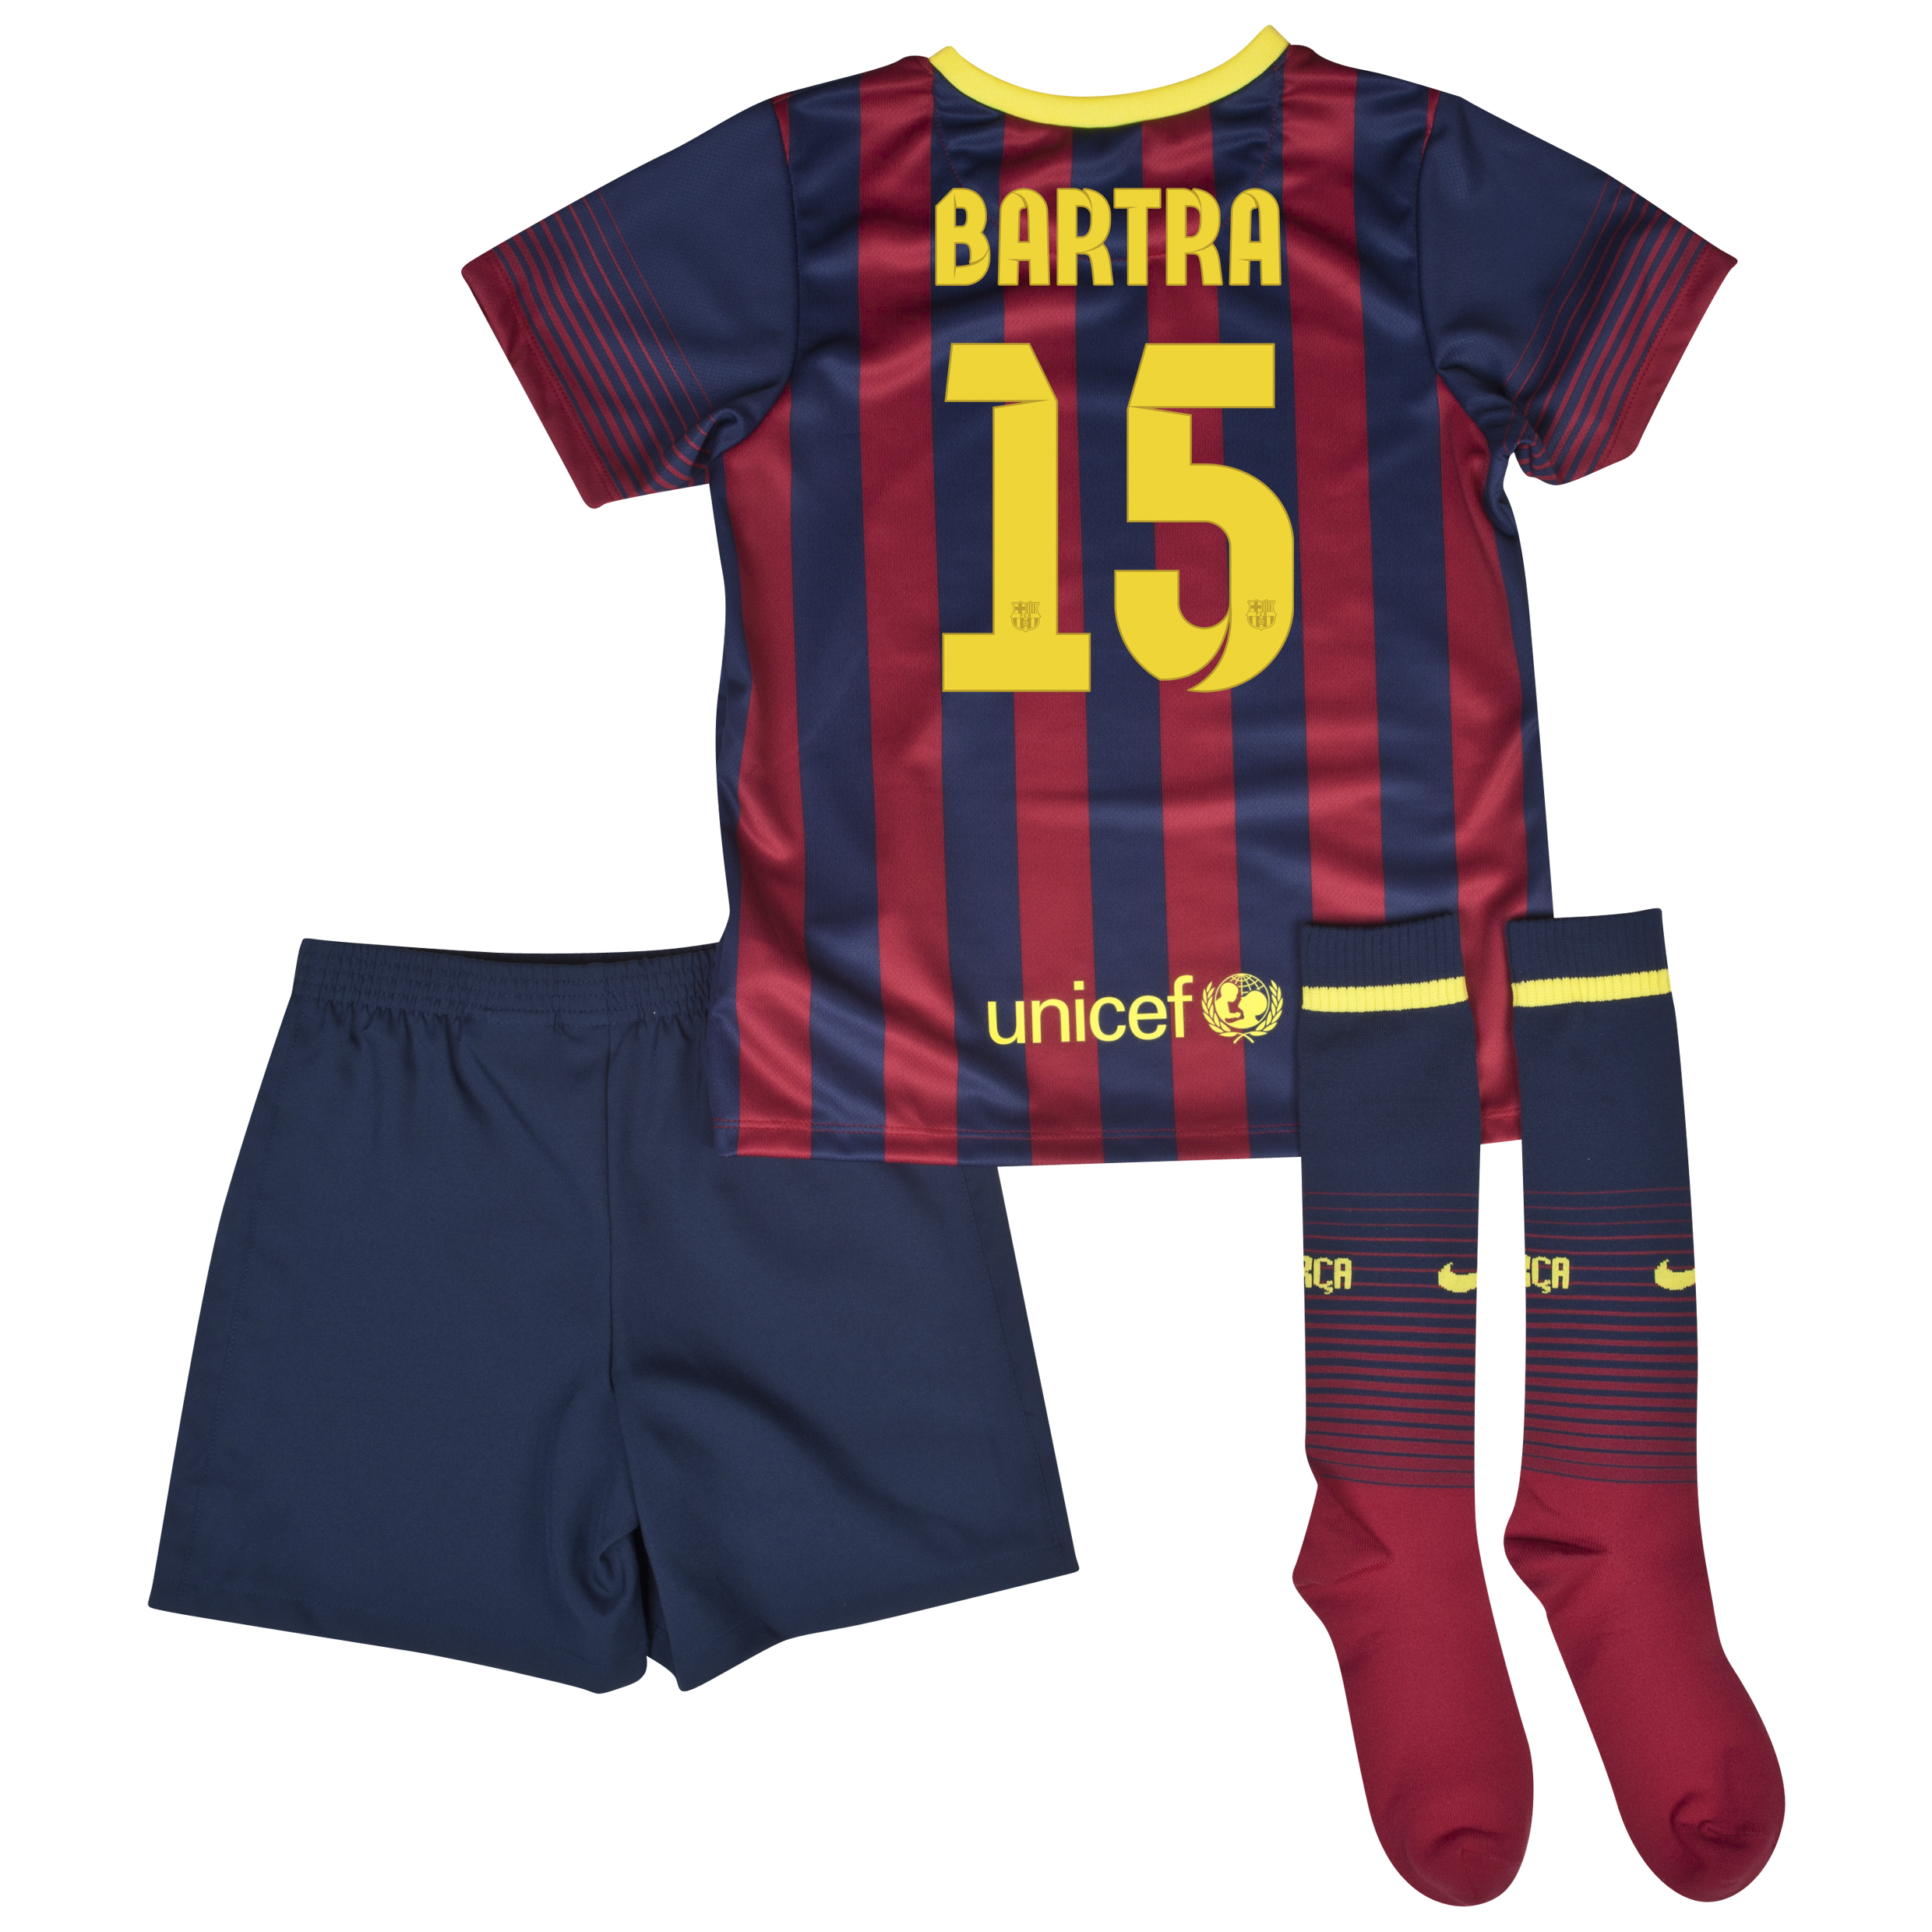 Barcelona Home Kit 2013/14 - Little Boys with Bartra 15 printing